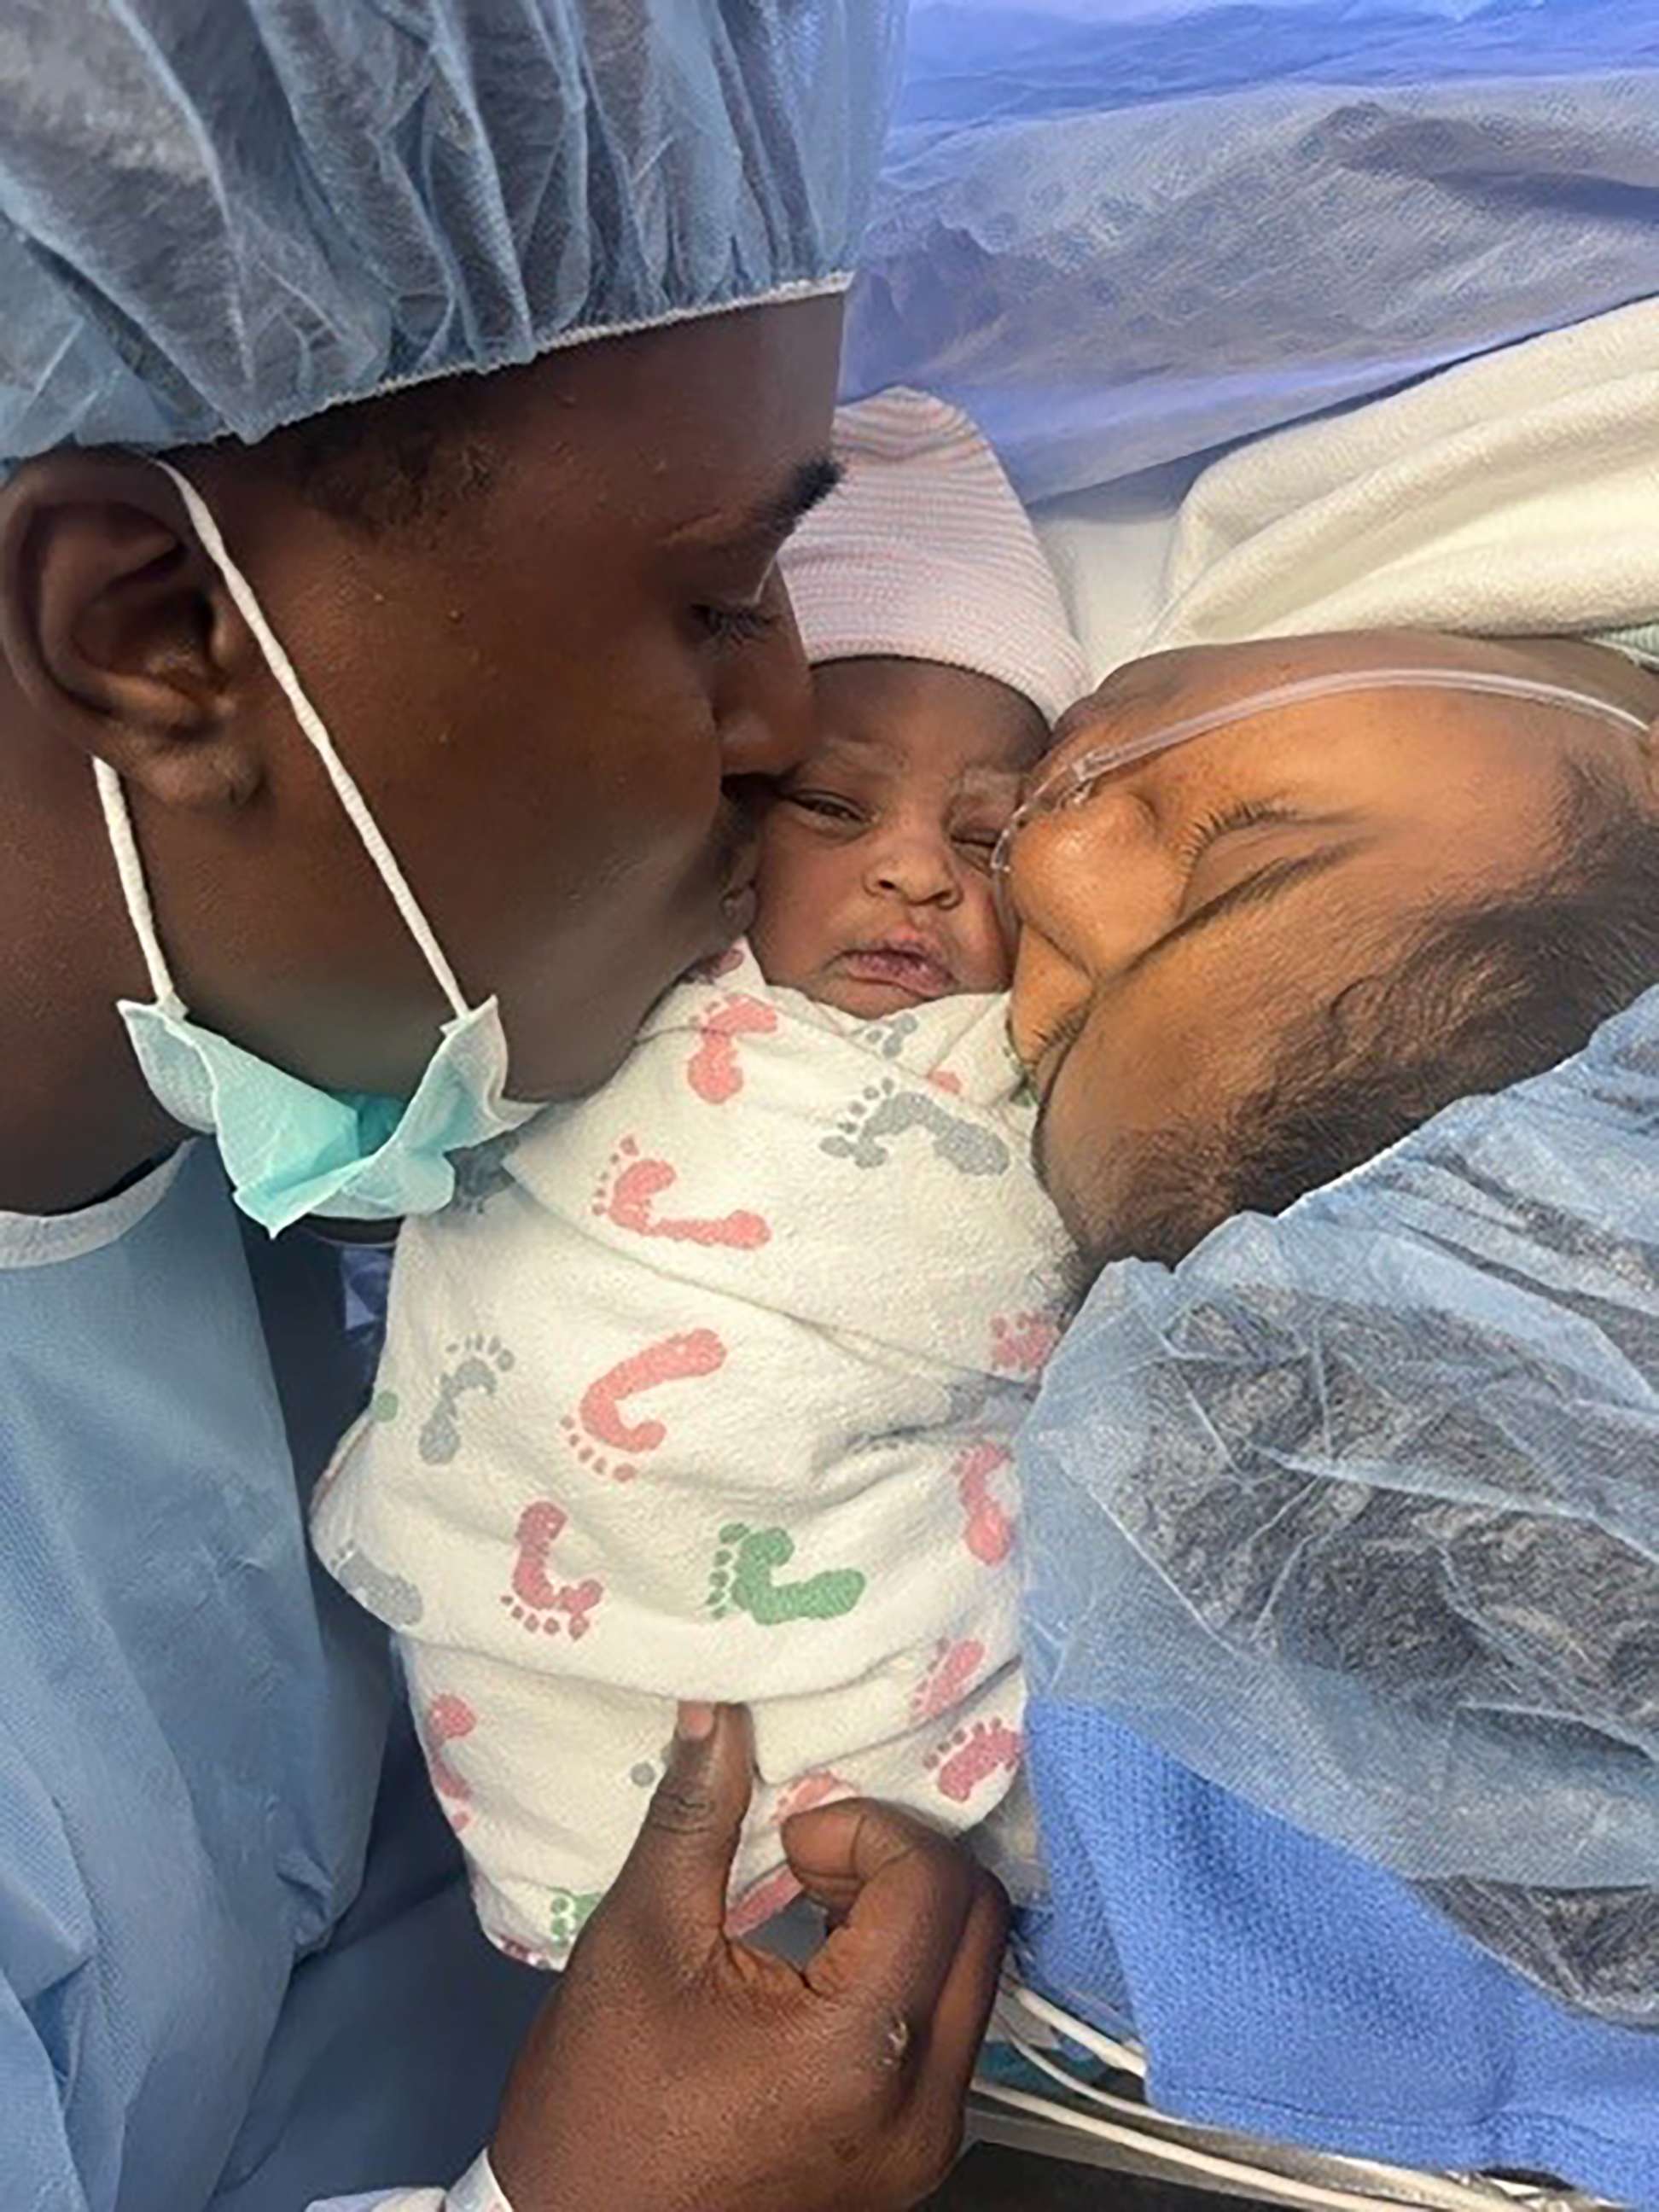 PHOTO: Hanna-Kay Williams and her fiancé kiss their newborn daughter, Wajiha, who was born during Hurricane Ian, Sept. 28, 2022, in Melbourne, Fla.